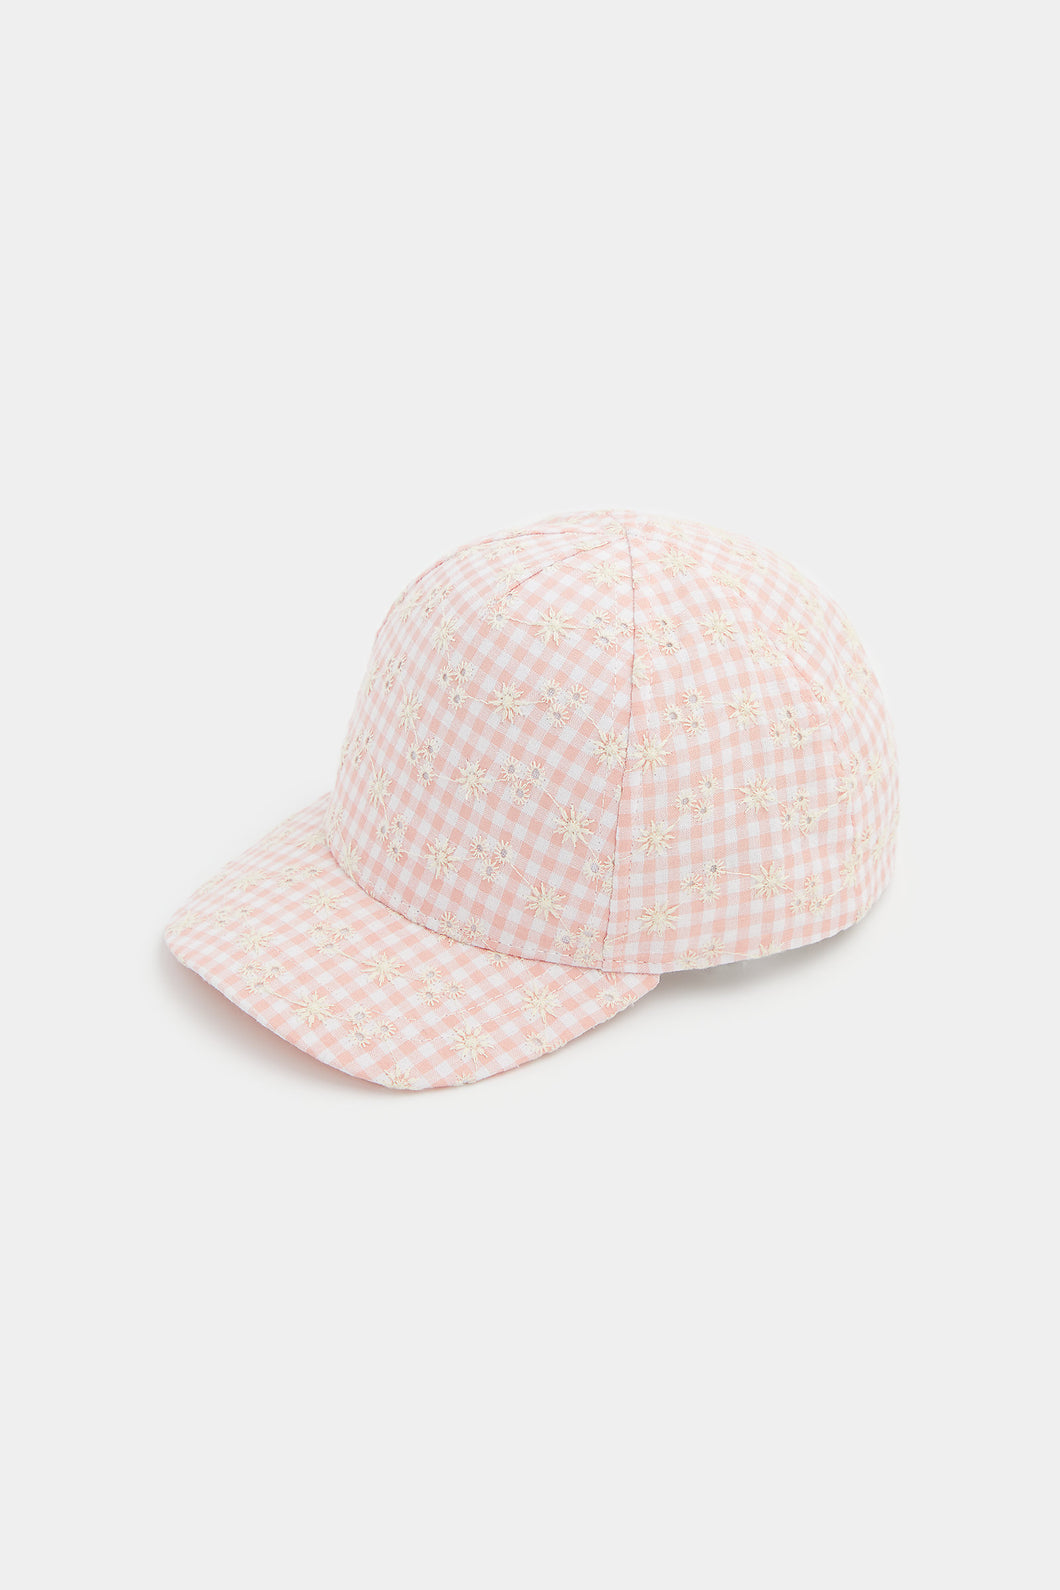 Mothercare Pink Checked Cap